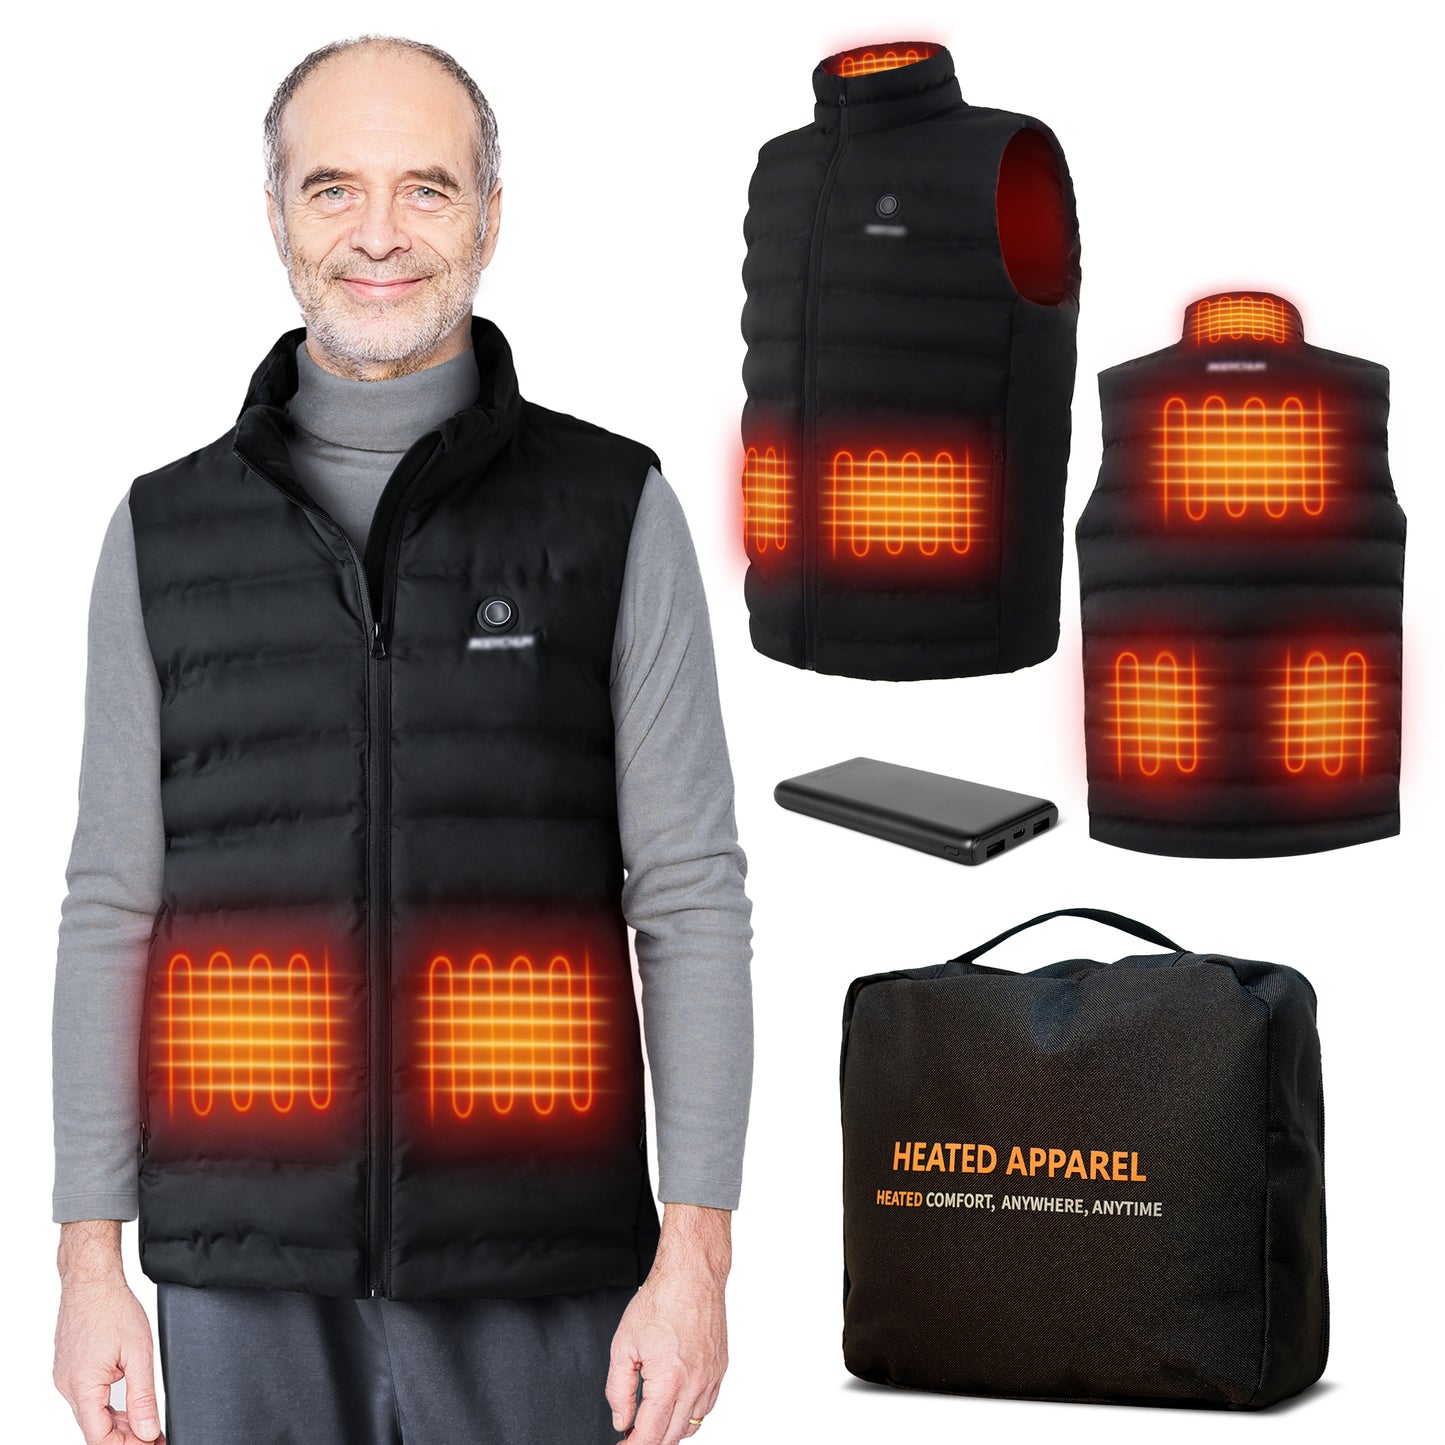 Aptoco Heated Vest for Women Men 6 Heating Zones Winter Warm Electric Heating Vest with Rechargeable Power Bank Washable, M, Christmas Gift